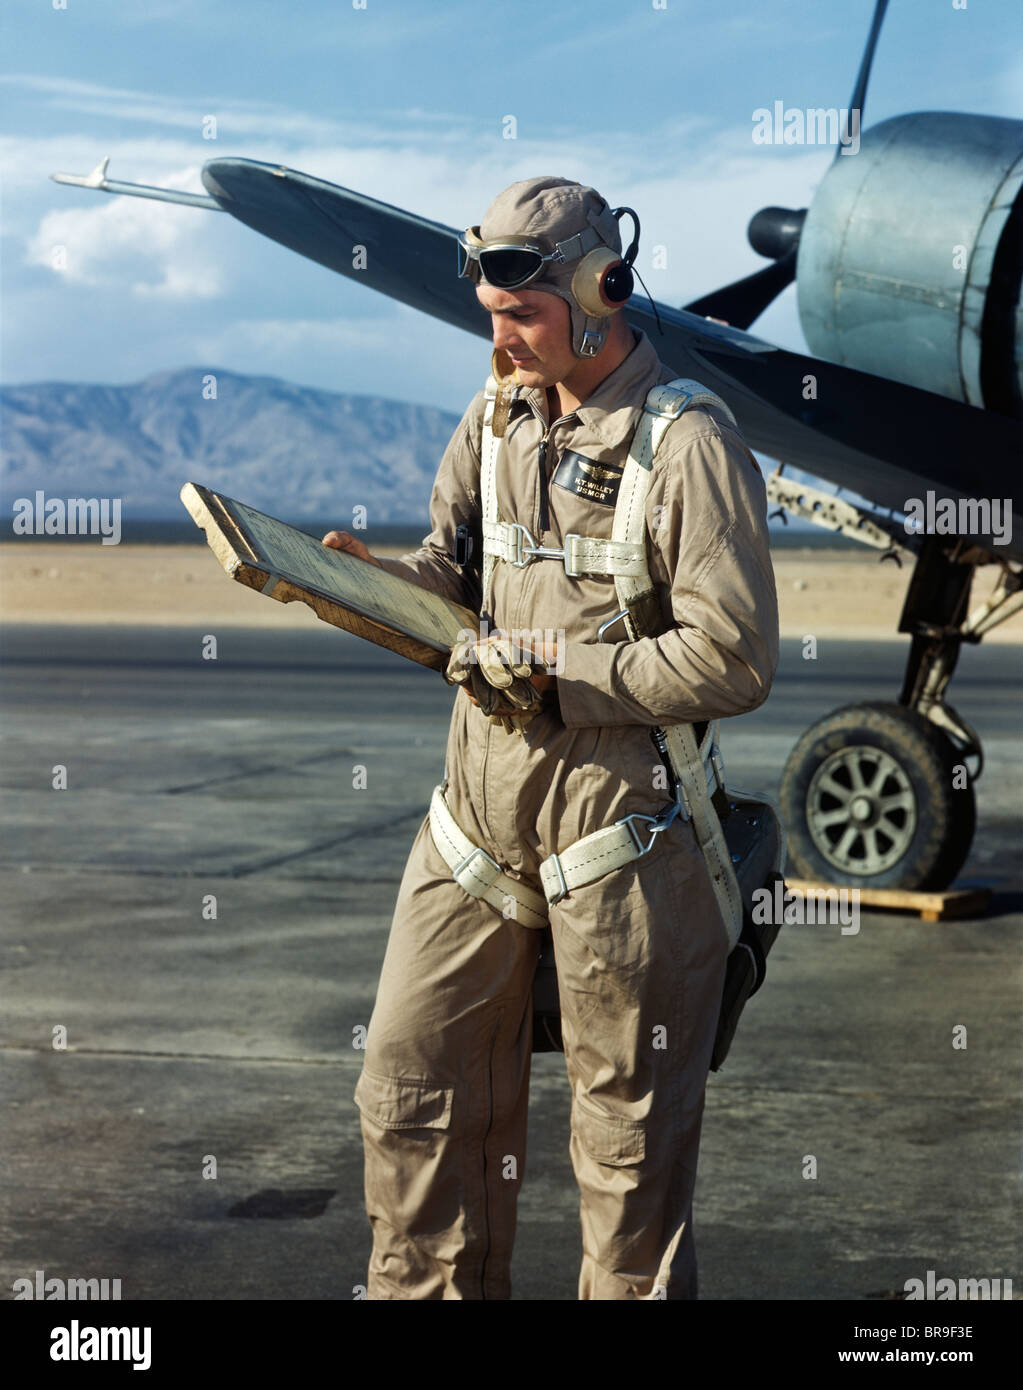 1940s-air-force-pilot-standing-by-plane-going-over-checklist-flight-BR9F3E.jpg